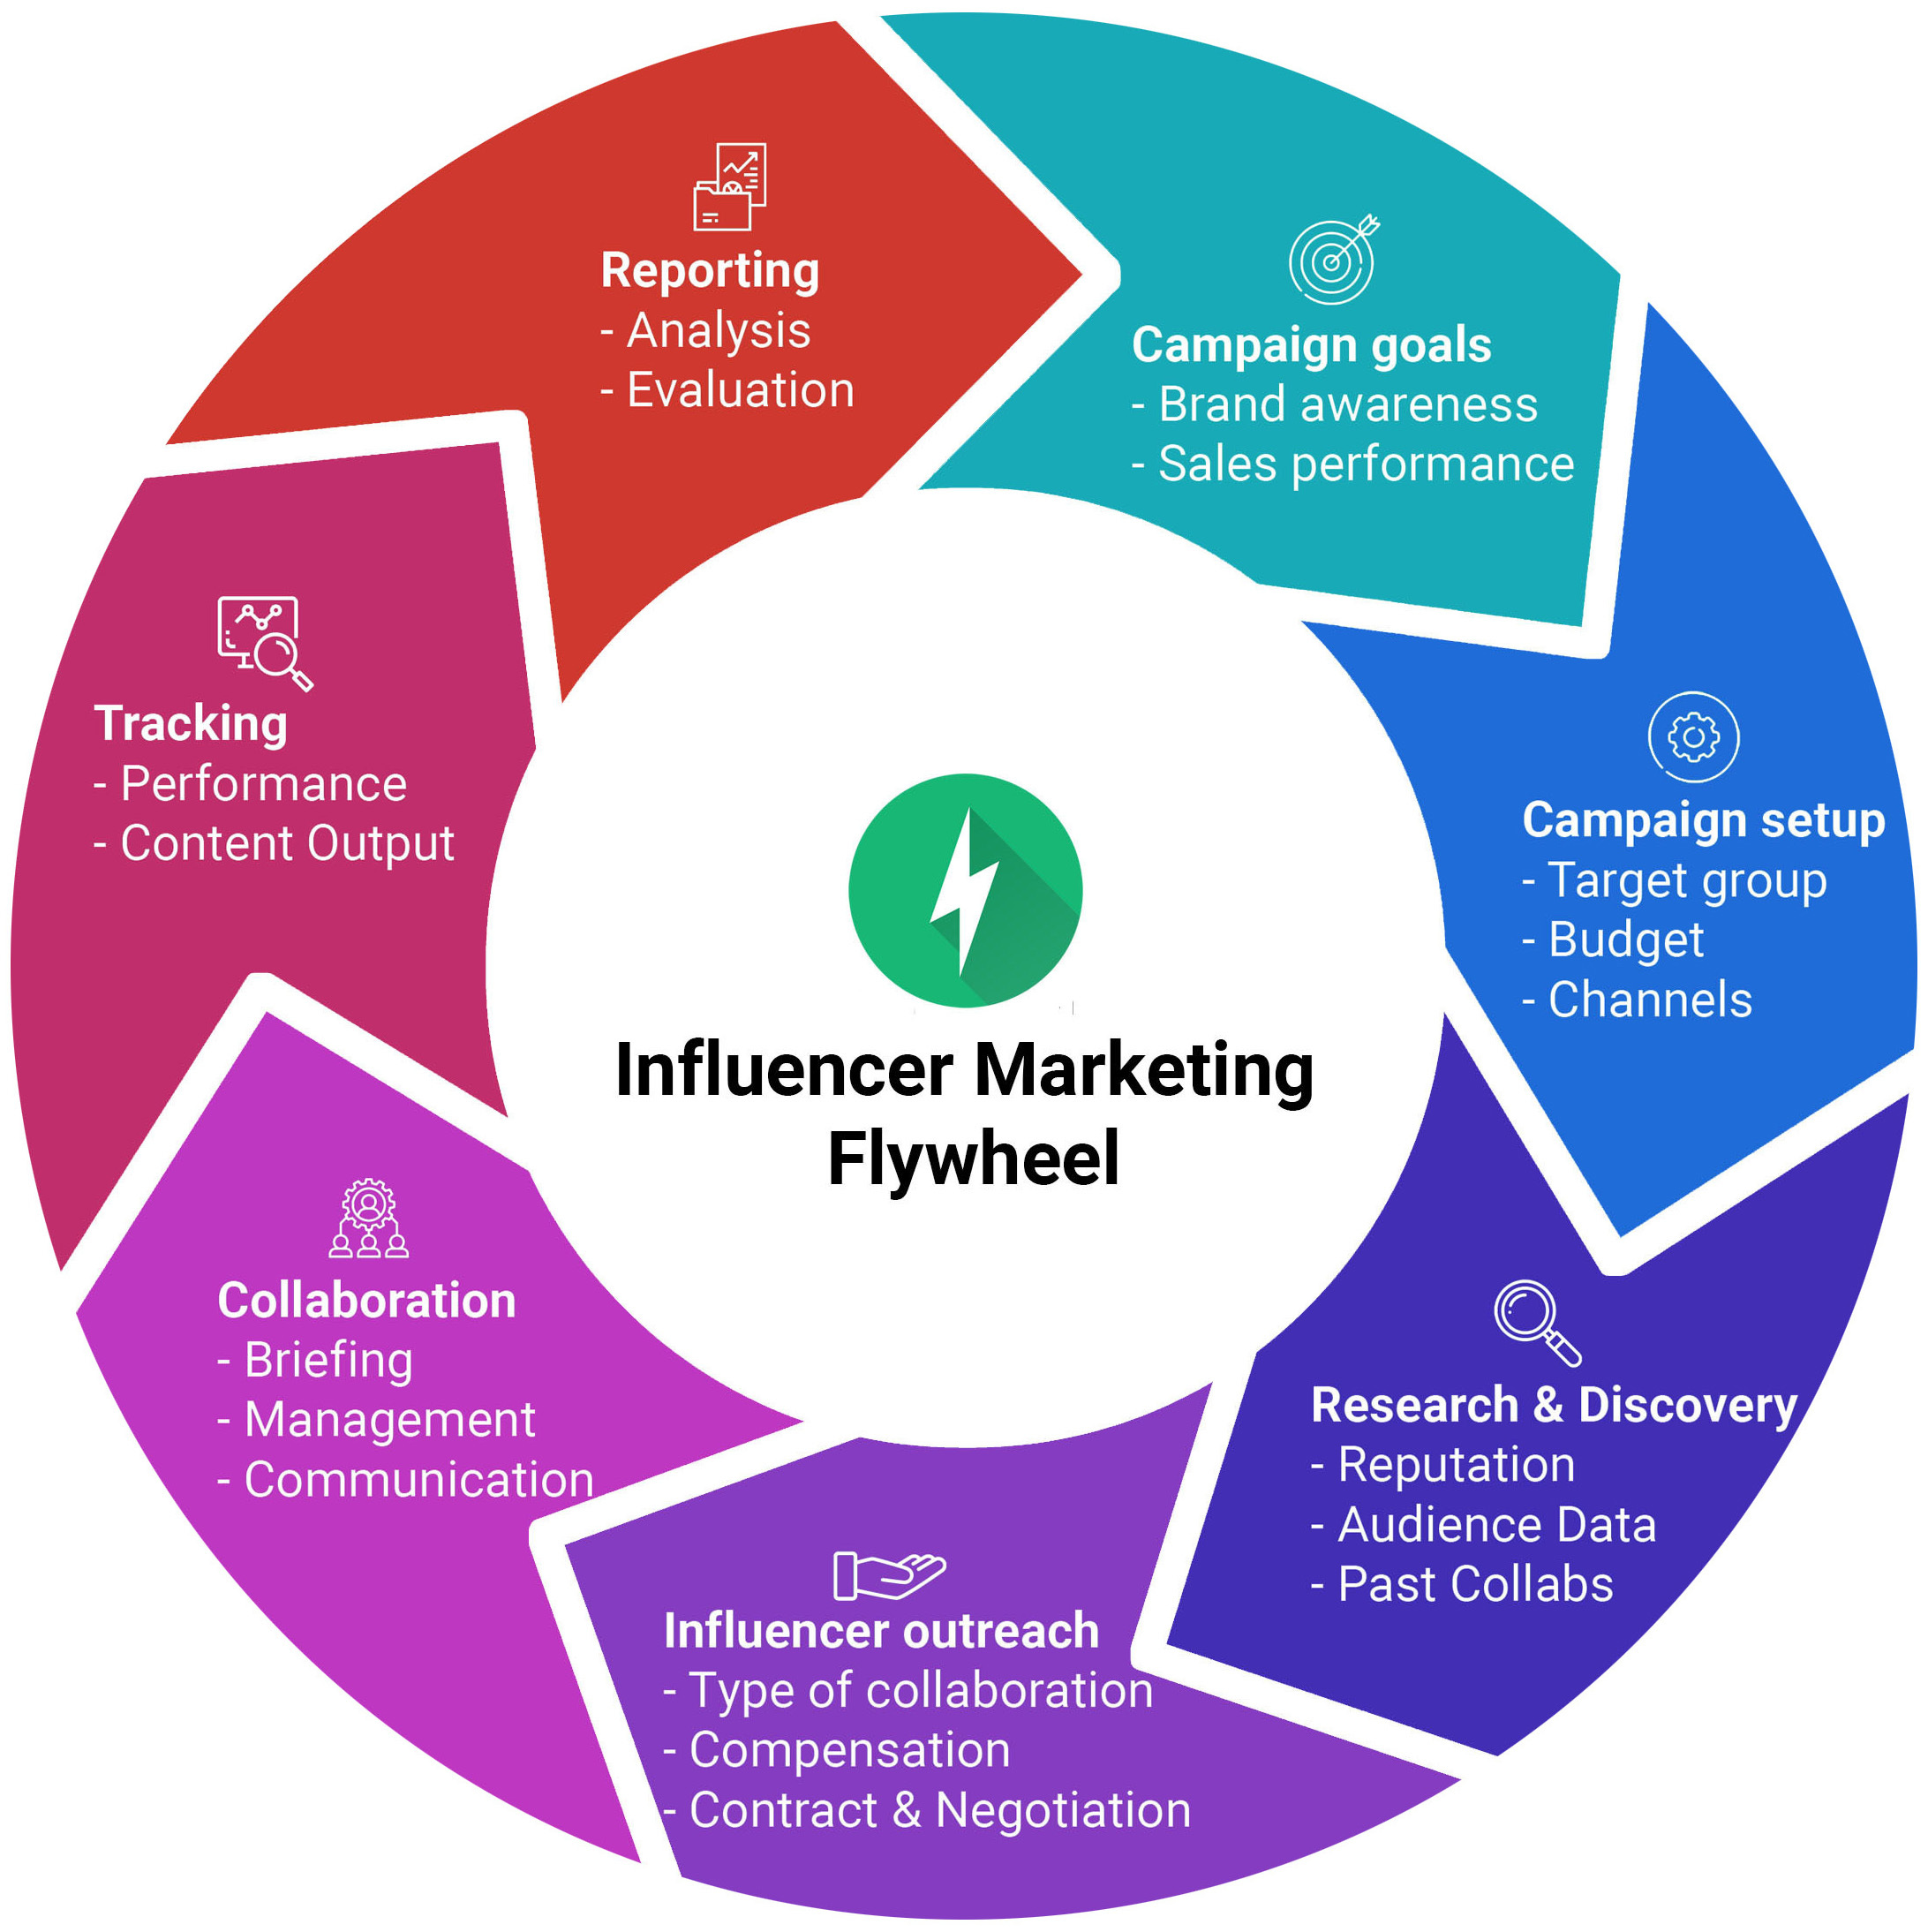 Influencer Marketing Guide – Complete Guide to Influencer Marketing